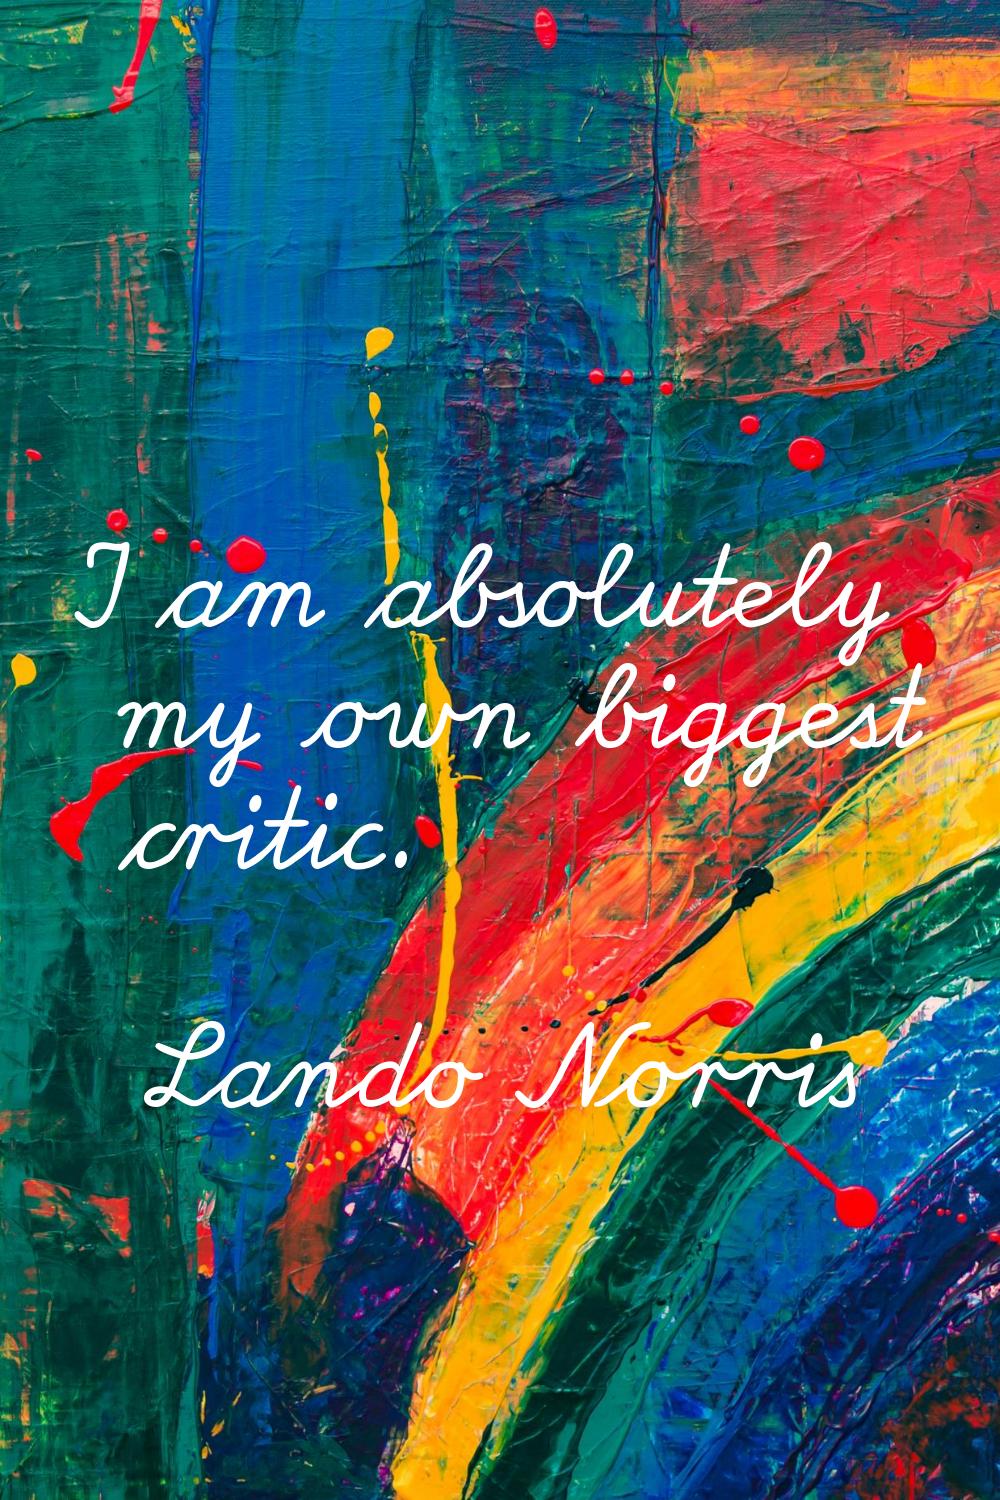 I am absolutely my own biggest critic.